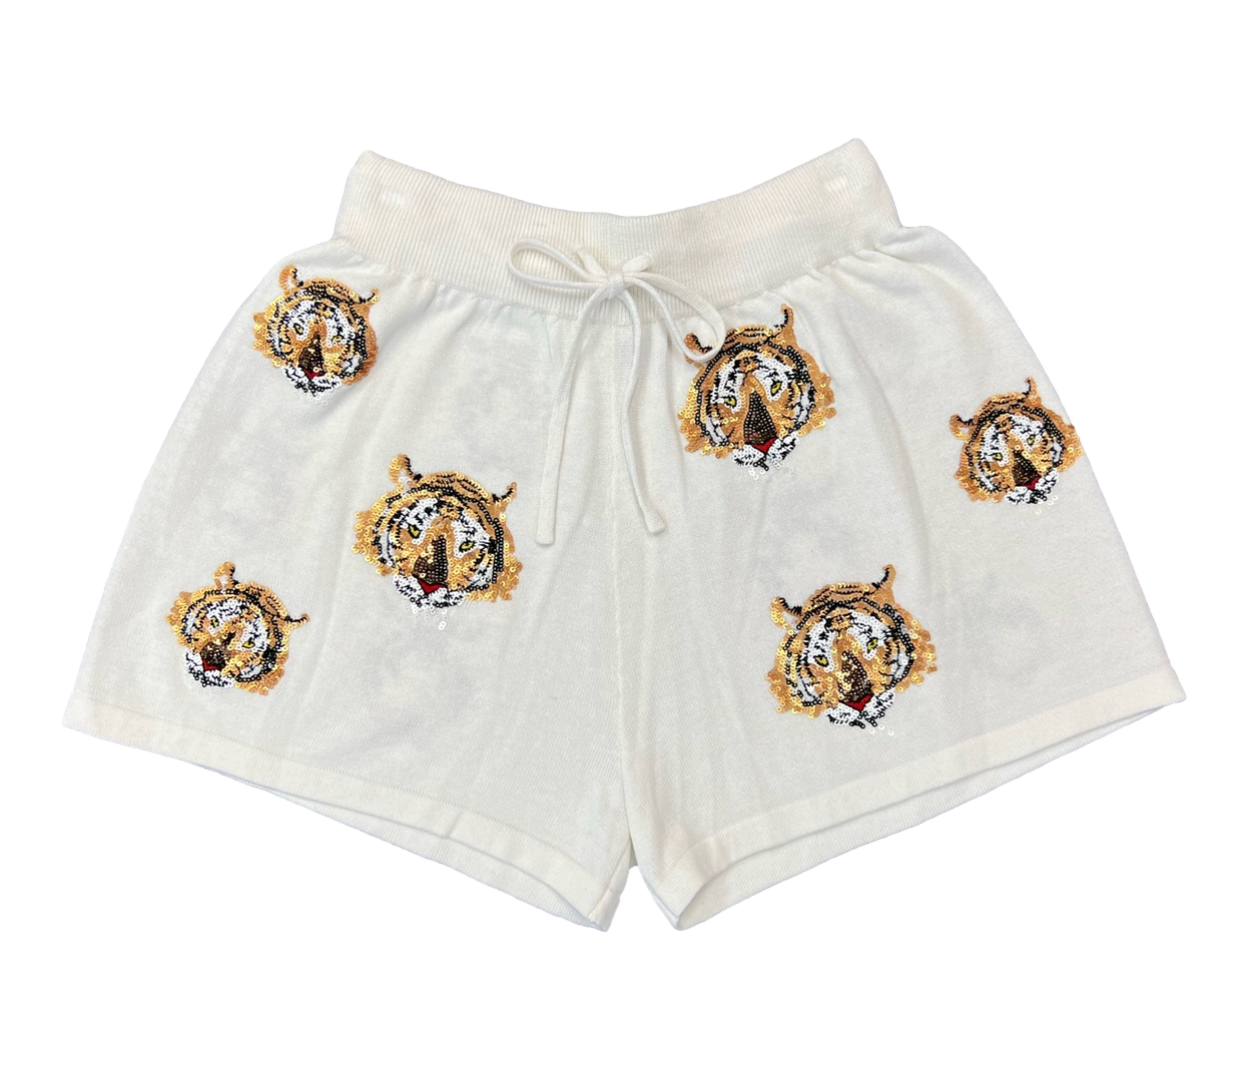 Tiger Takeover Shorts